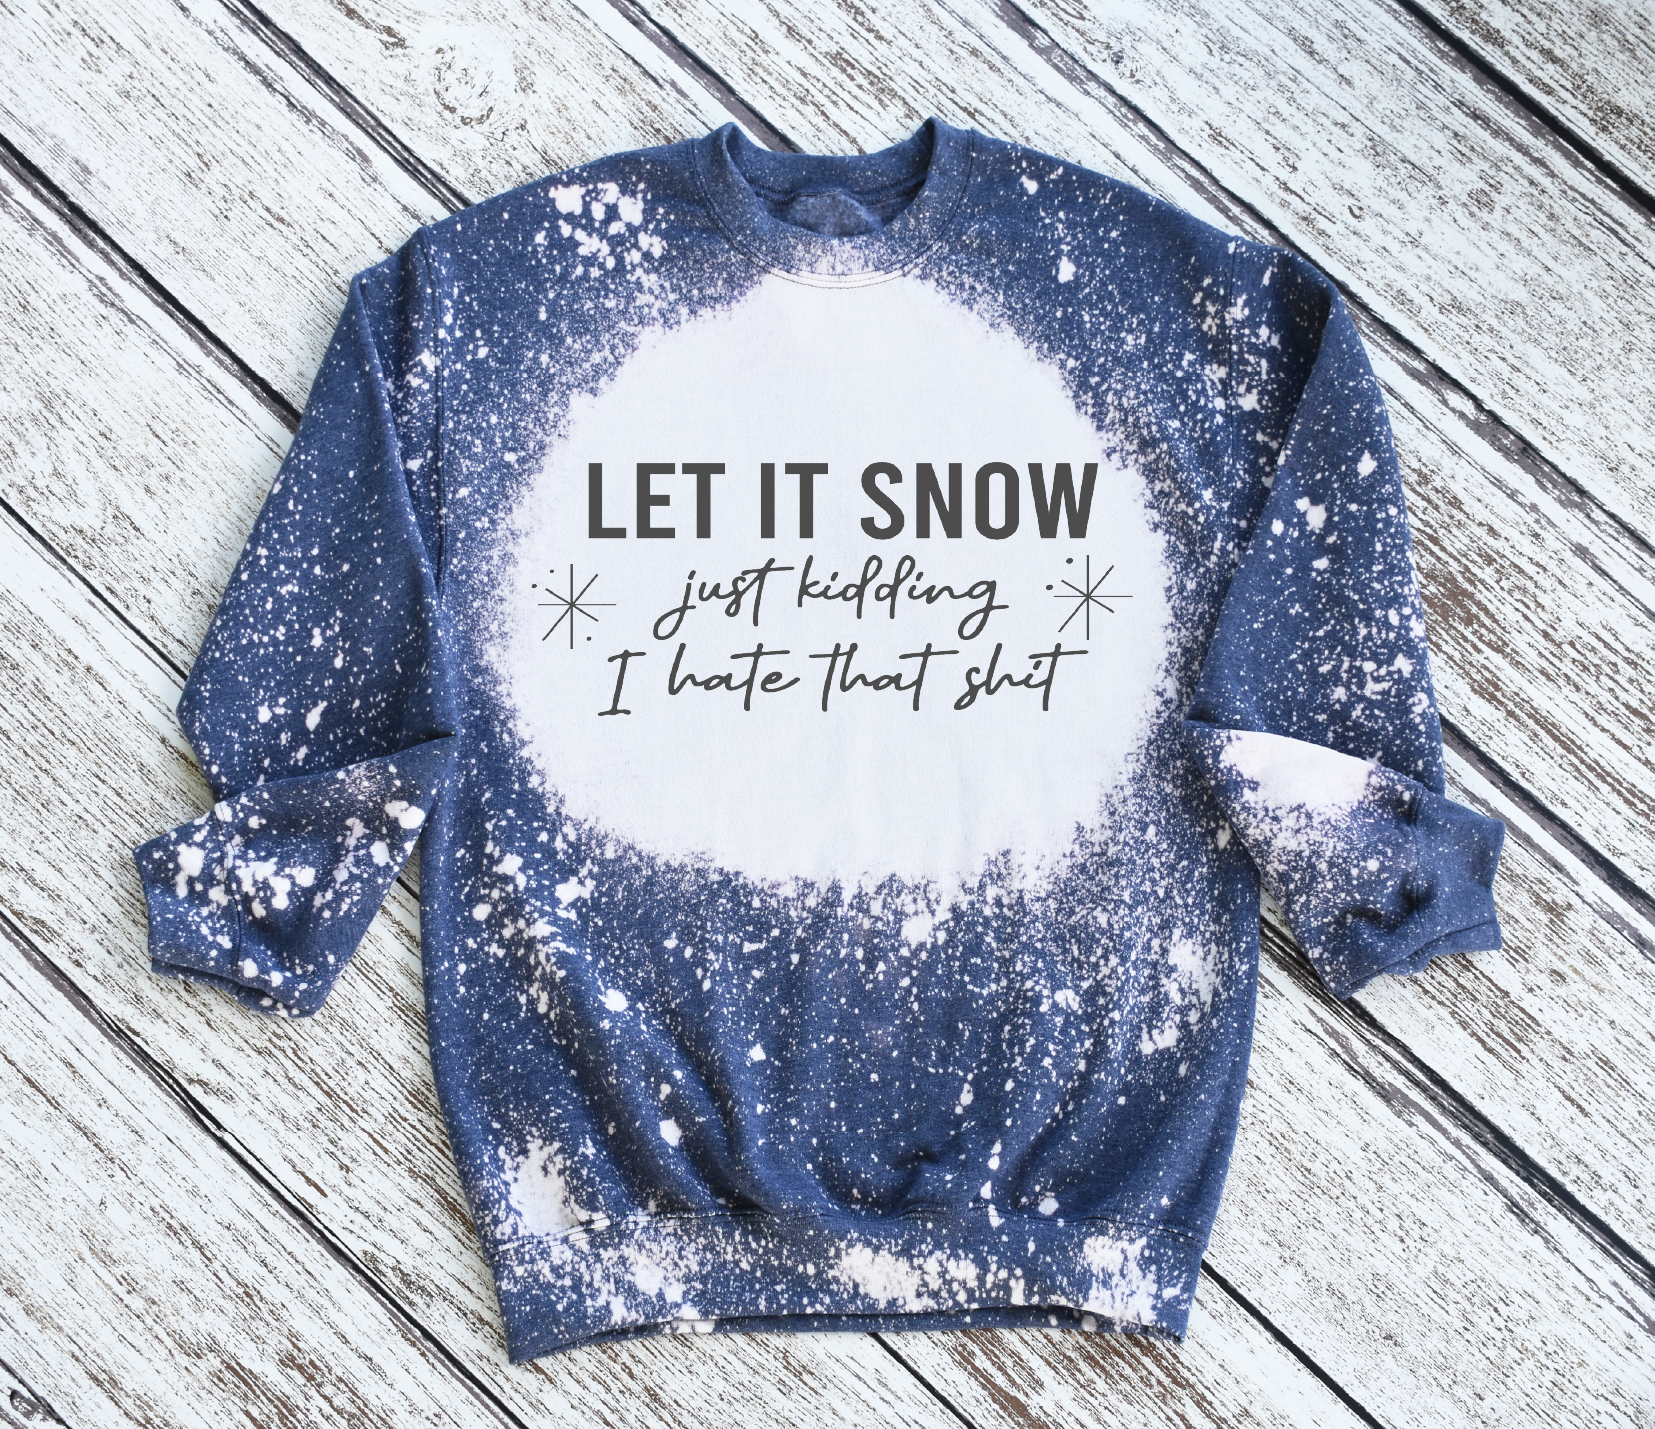 Let it Snow- Just Kidding